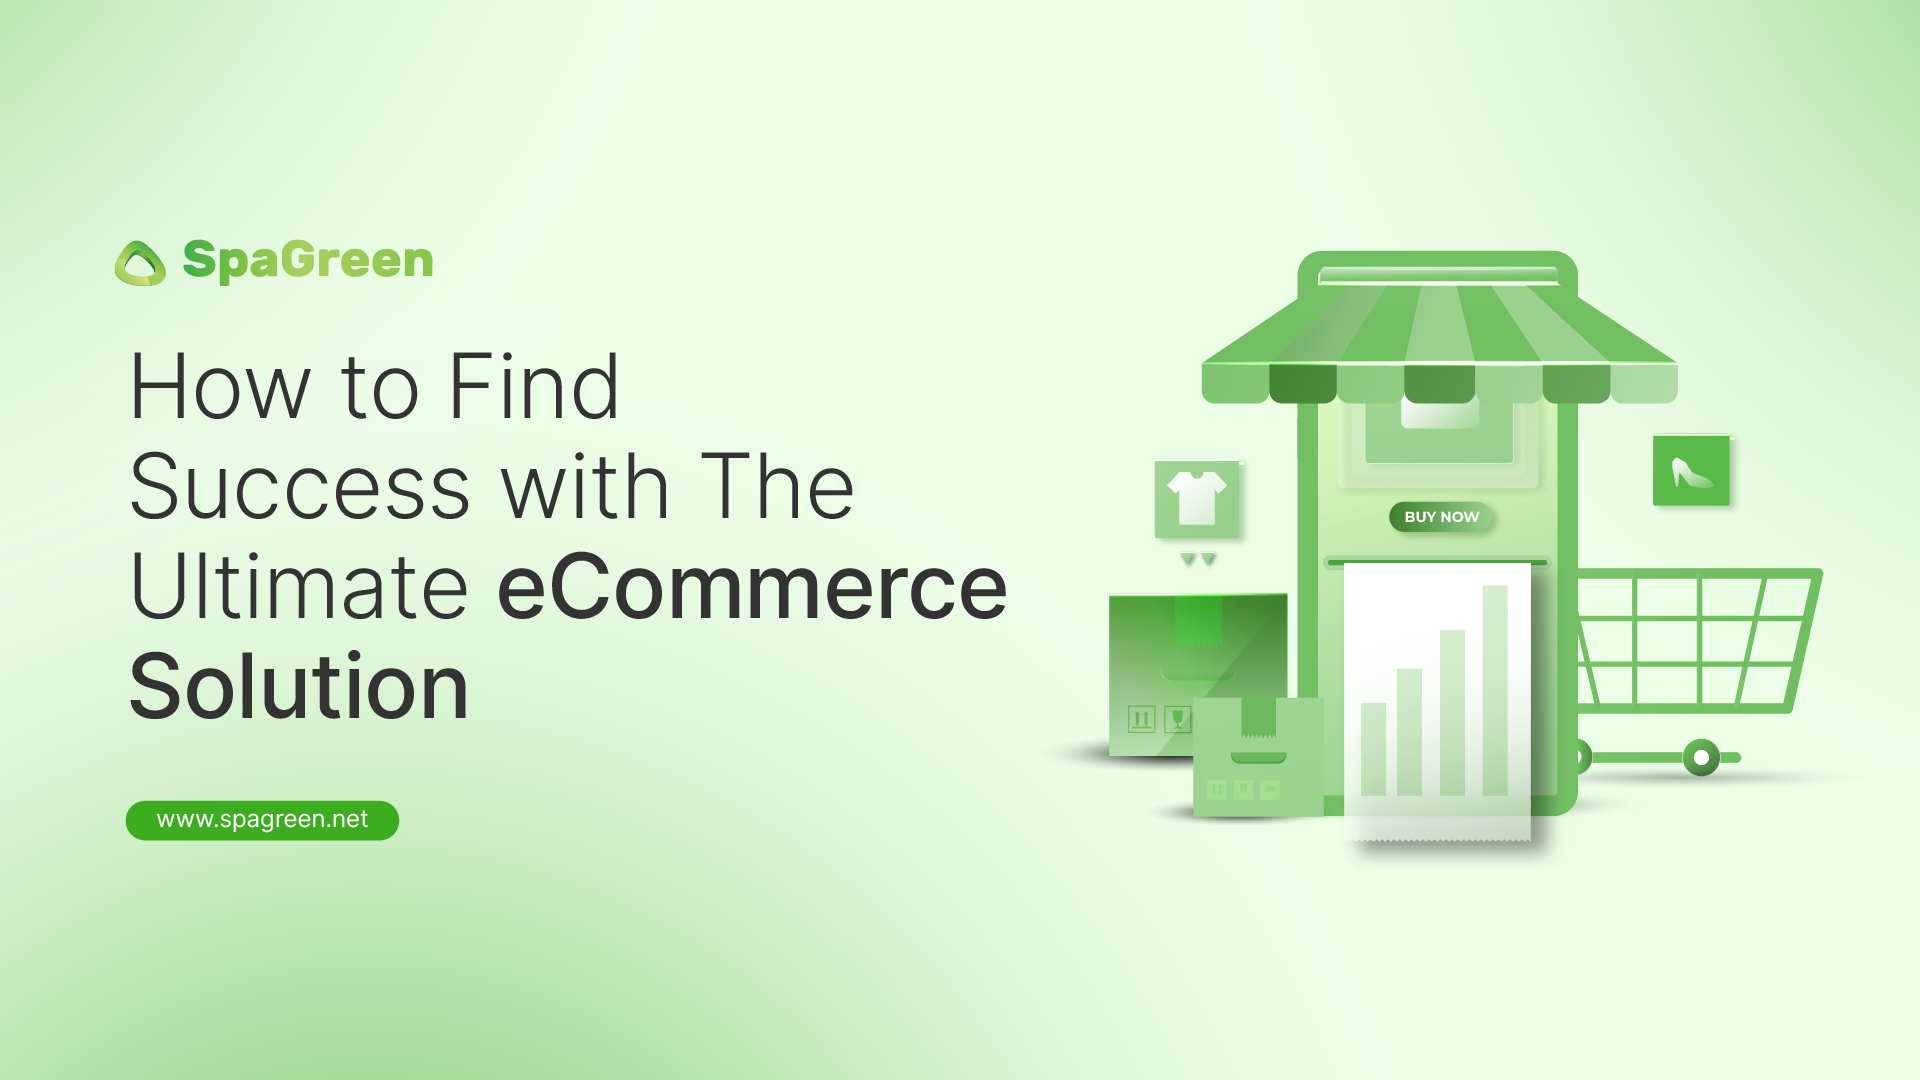 How to Find Success with the Ultimate eCommerce Solution